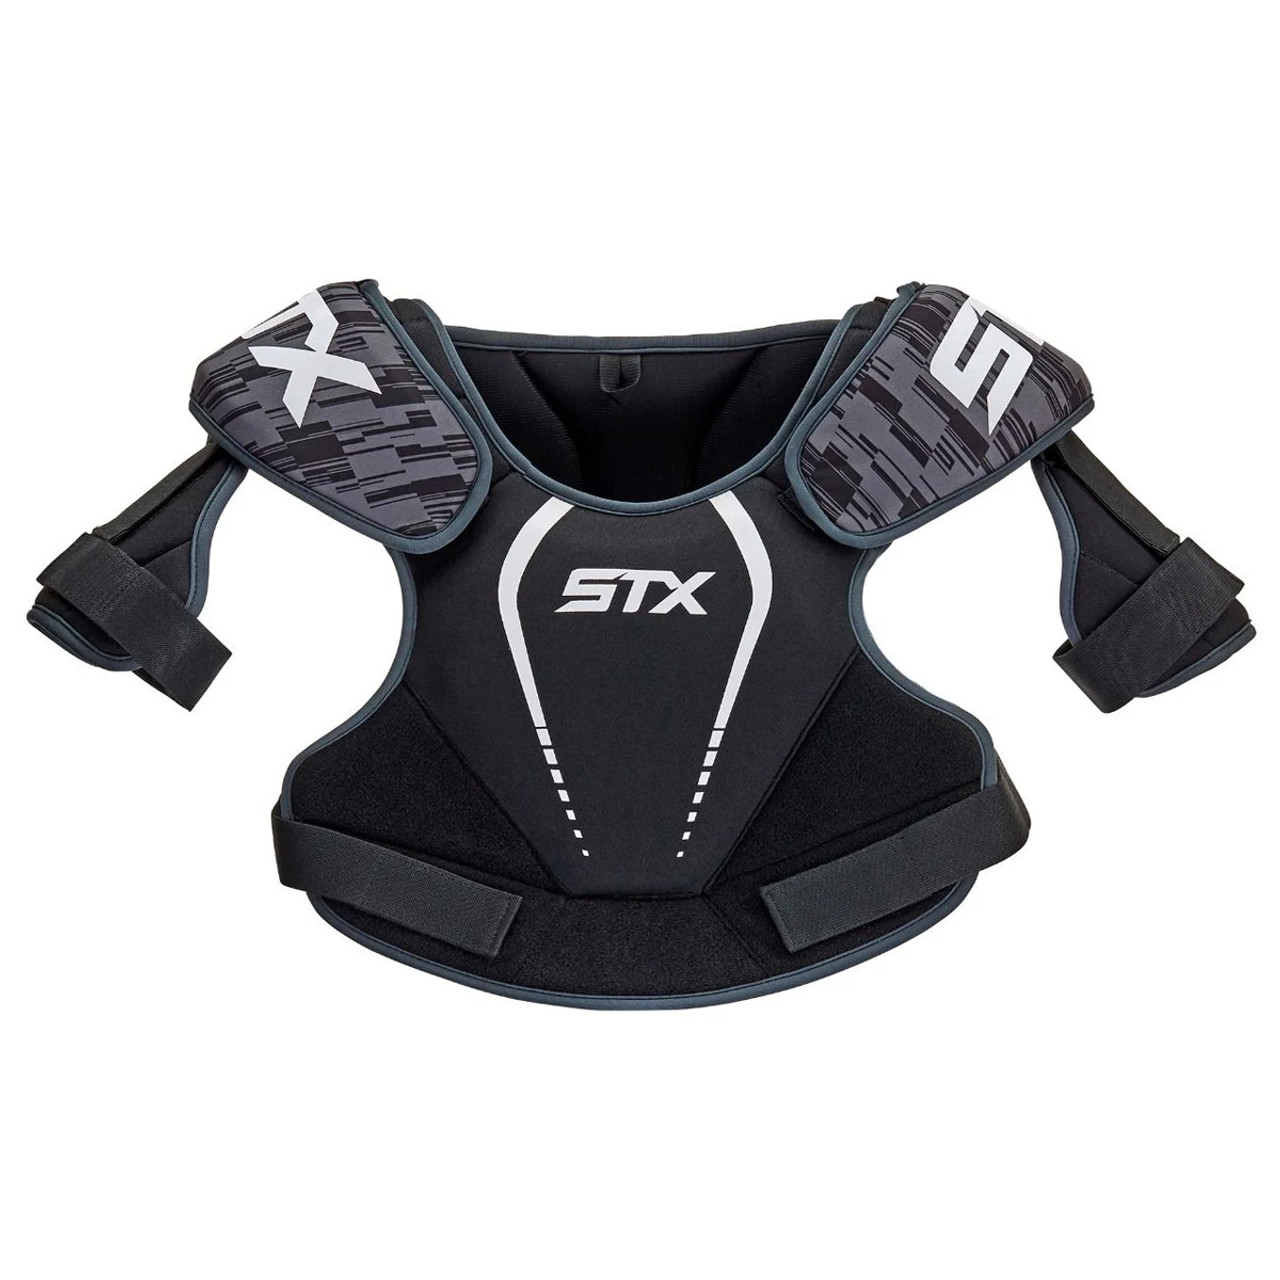 Shield 200™ Goalie Chest Protector